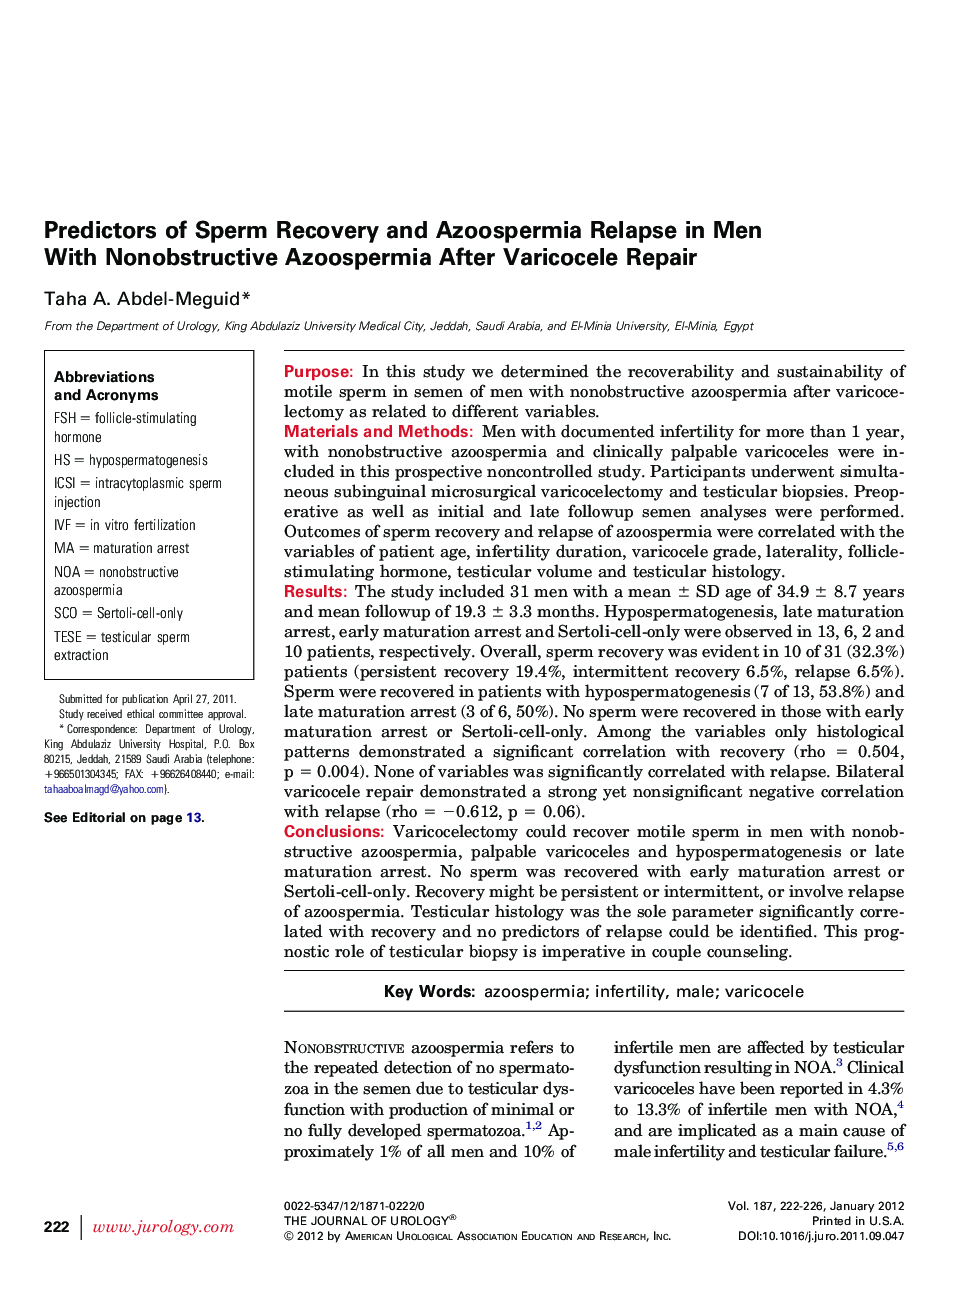 Predictors of Sperm Recovery and Azoospermia Relapse in Men With Nonobstructive Azoospermia After Varicocele Repair 